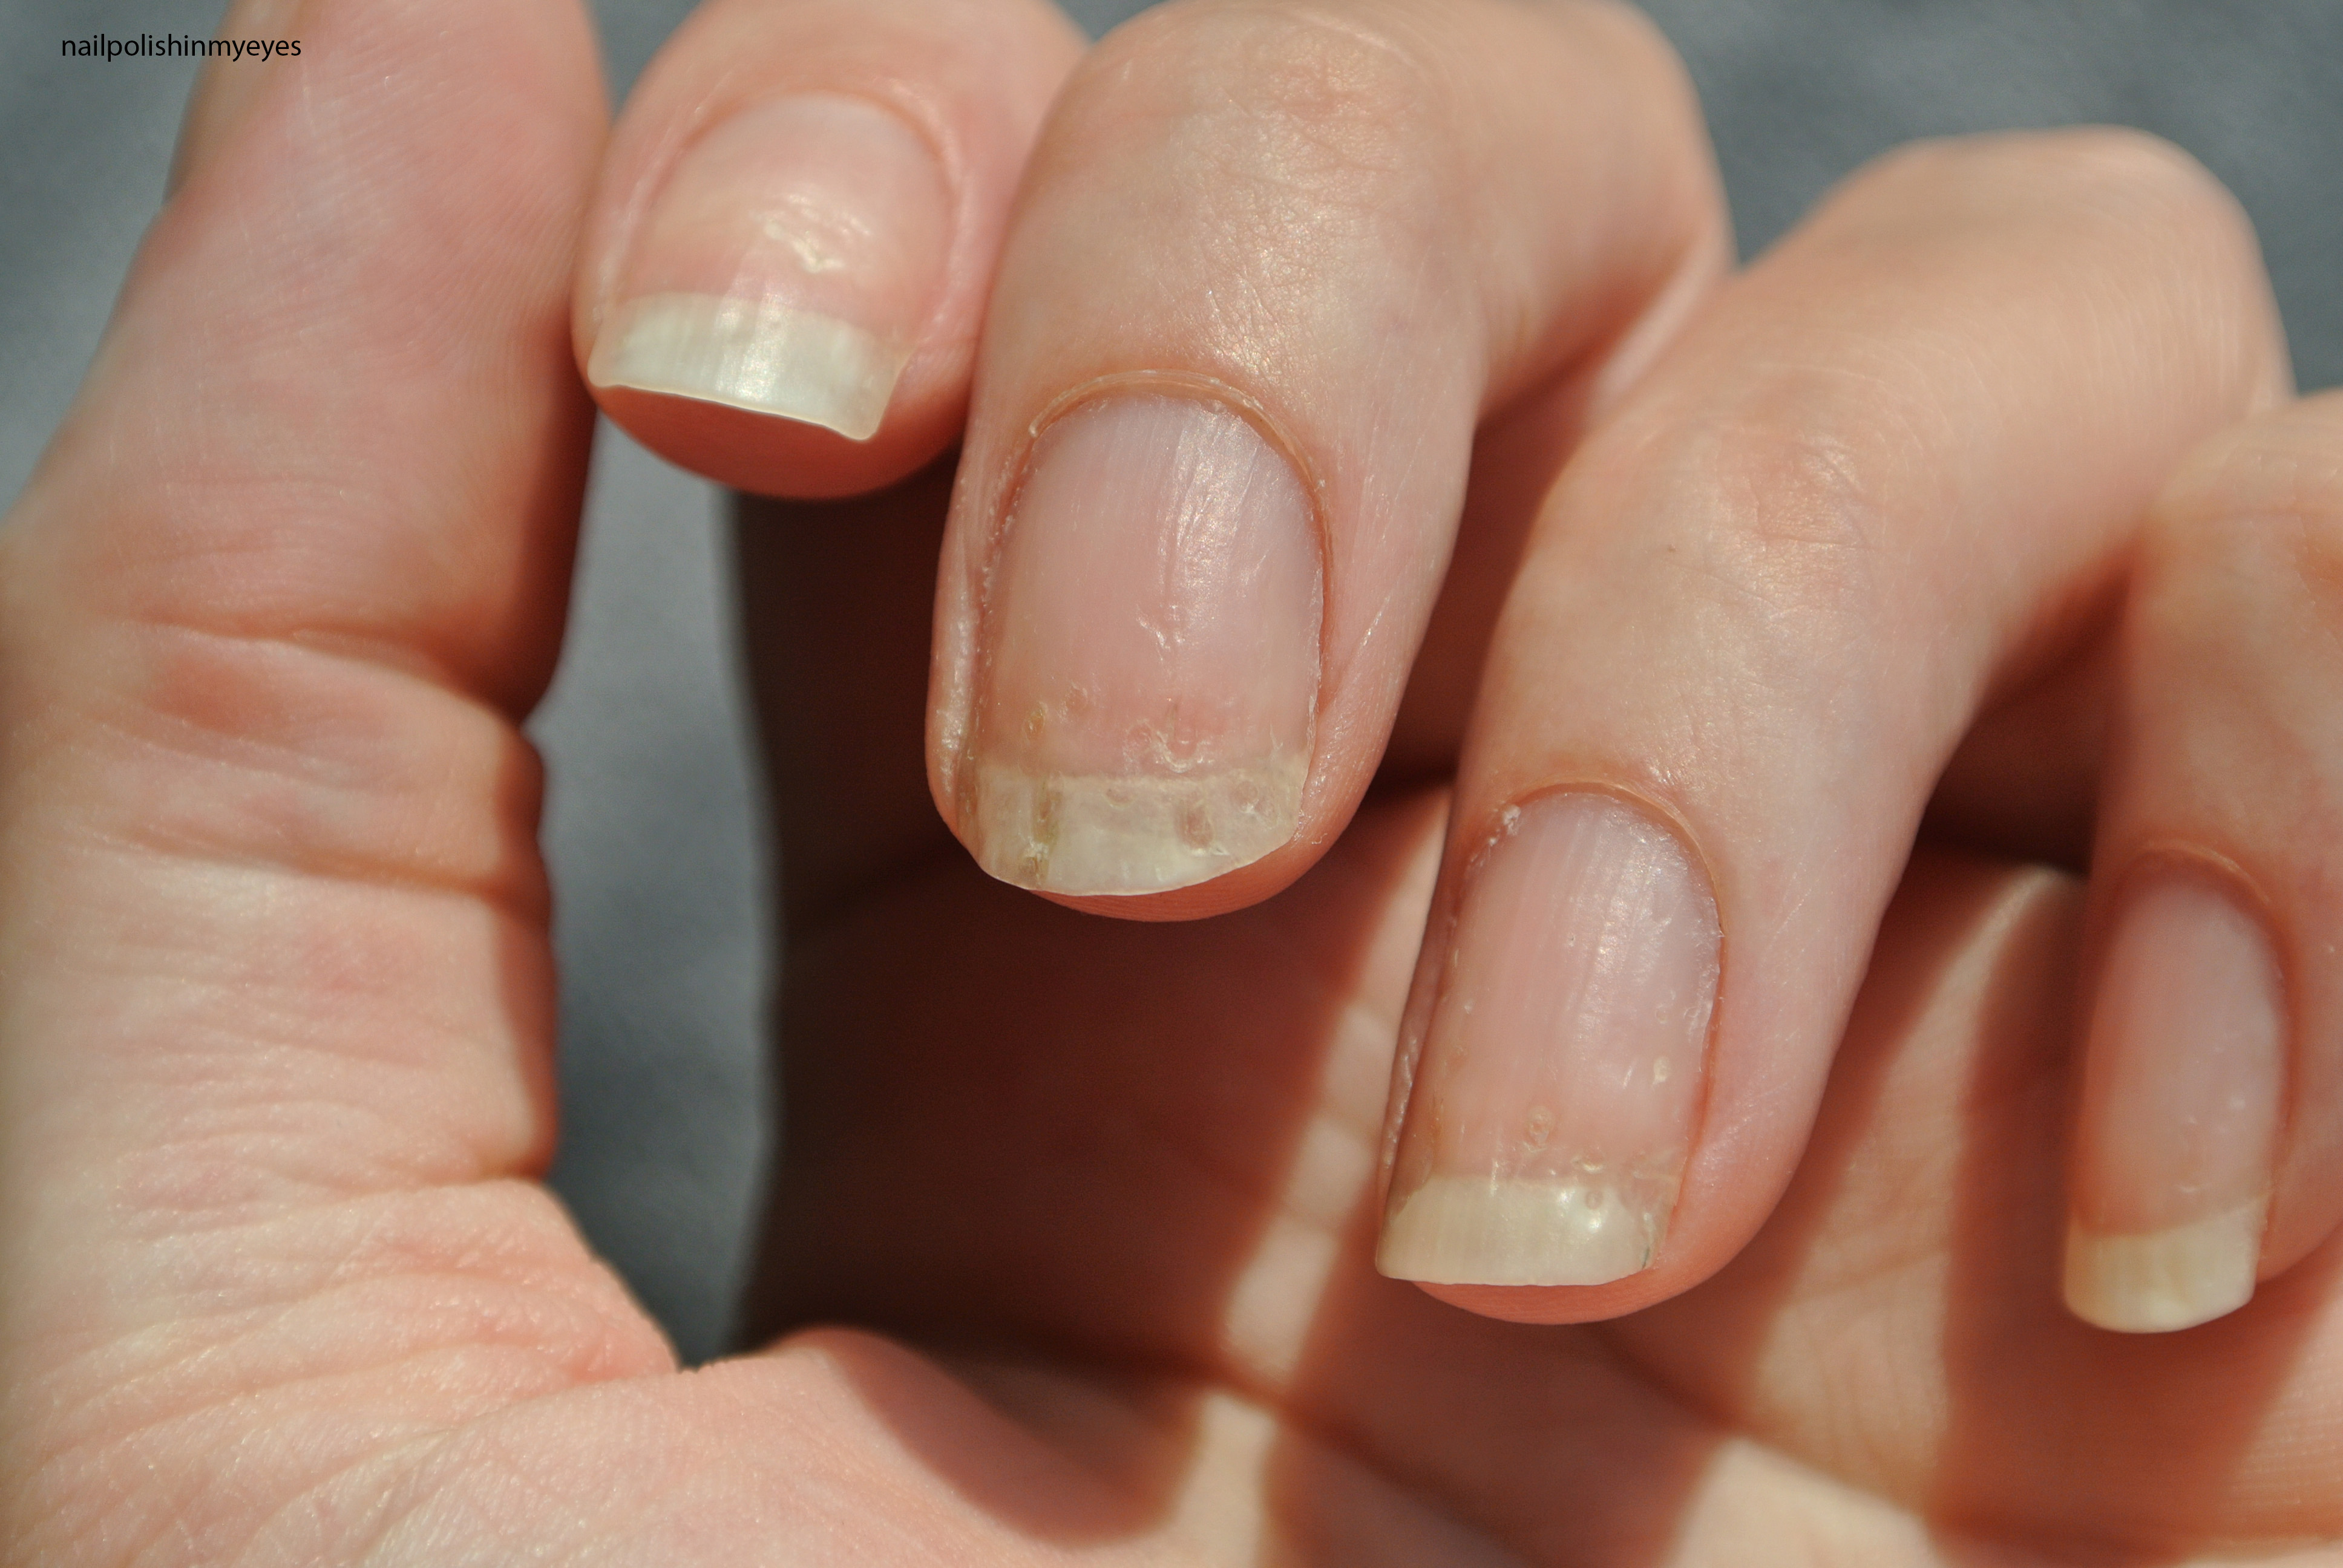 How Eczema Affected My Nails Nail Polish In My Eyes